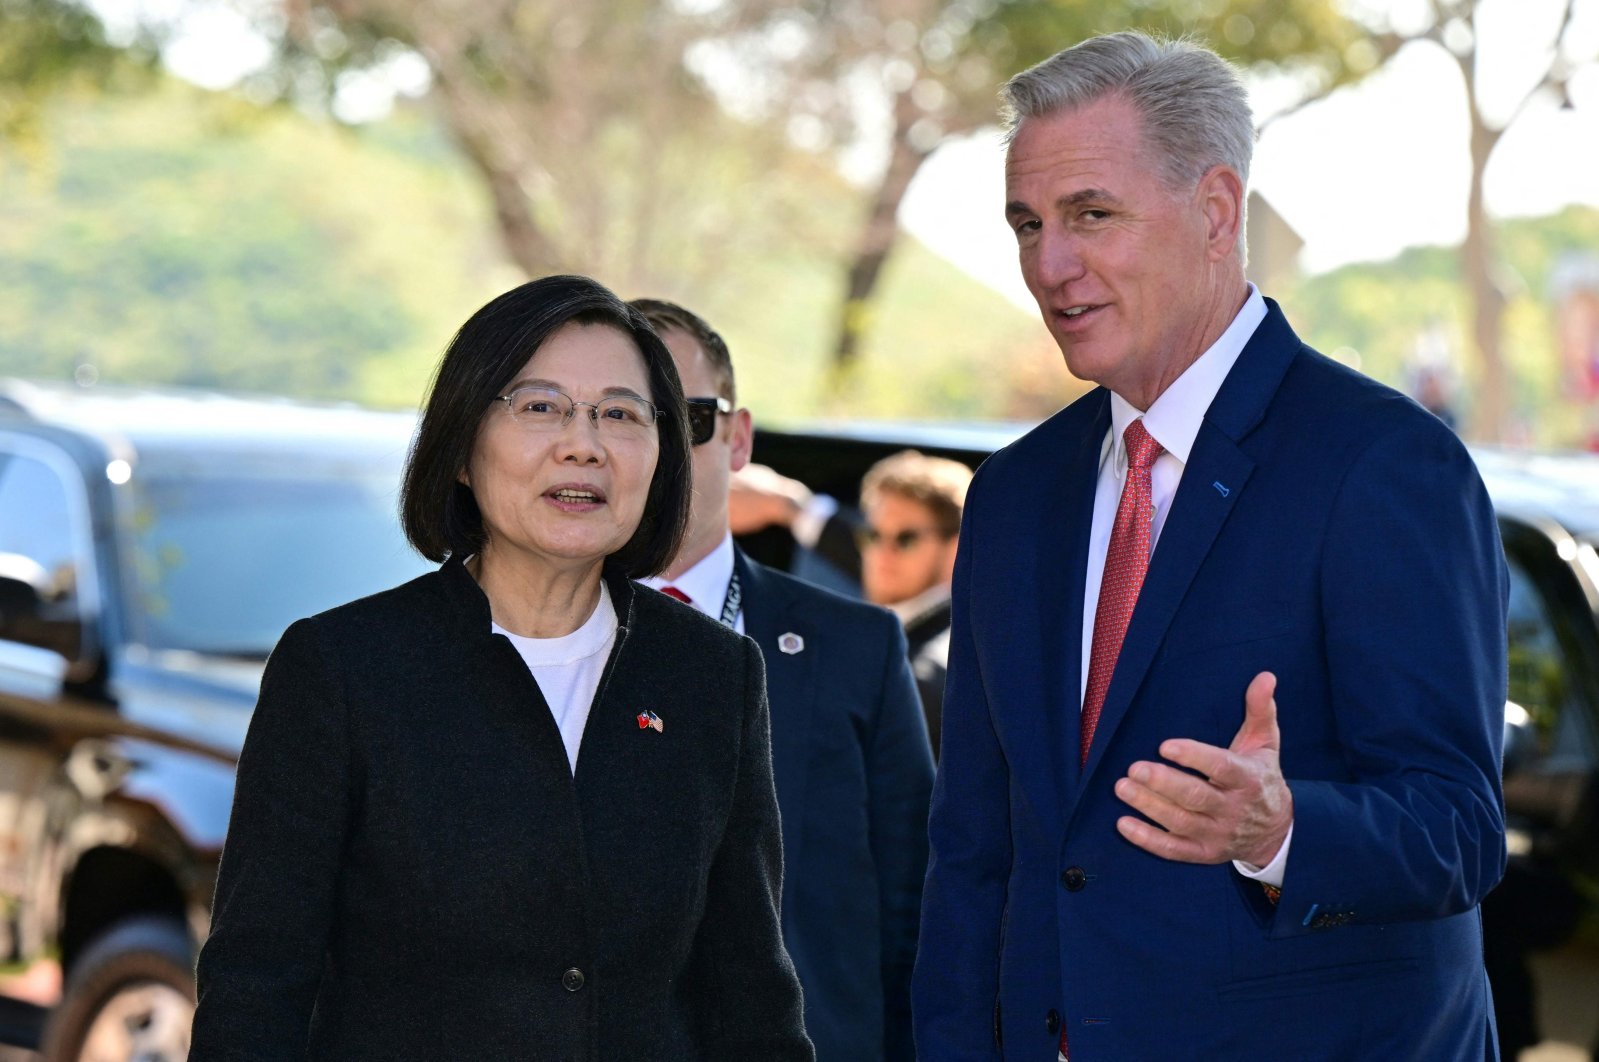 U.S. House Speaker Kevin McCarthy (R) welcomes Taiwanese leader Tsai Ing-wen in Simi Valley, California, U.S., April 5, 2023. (AFP Photo)